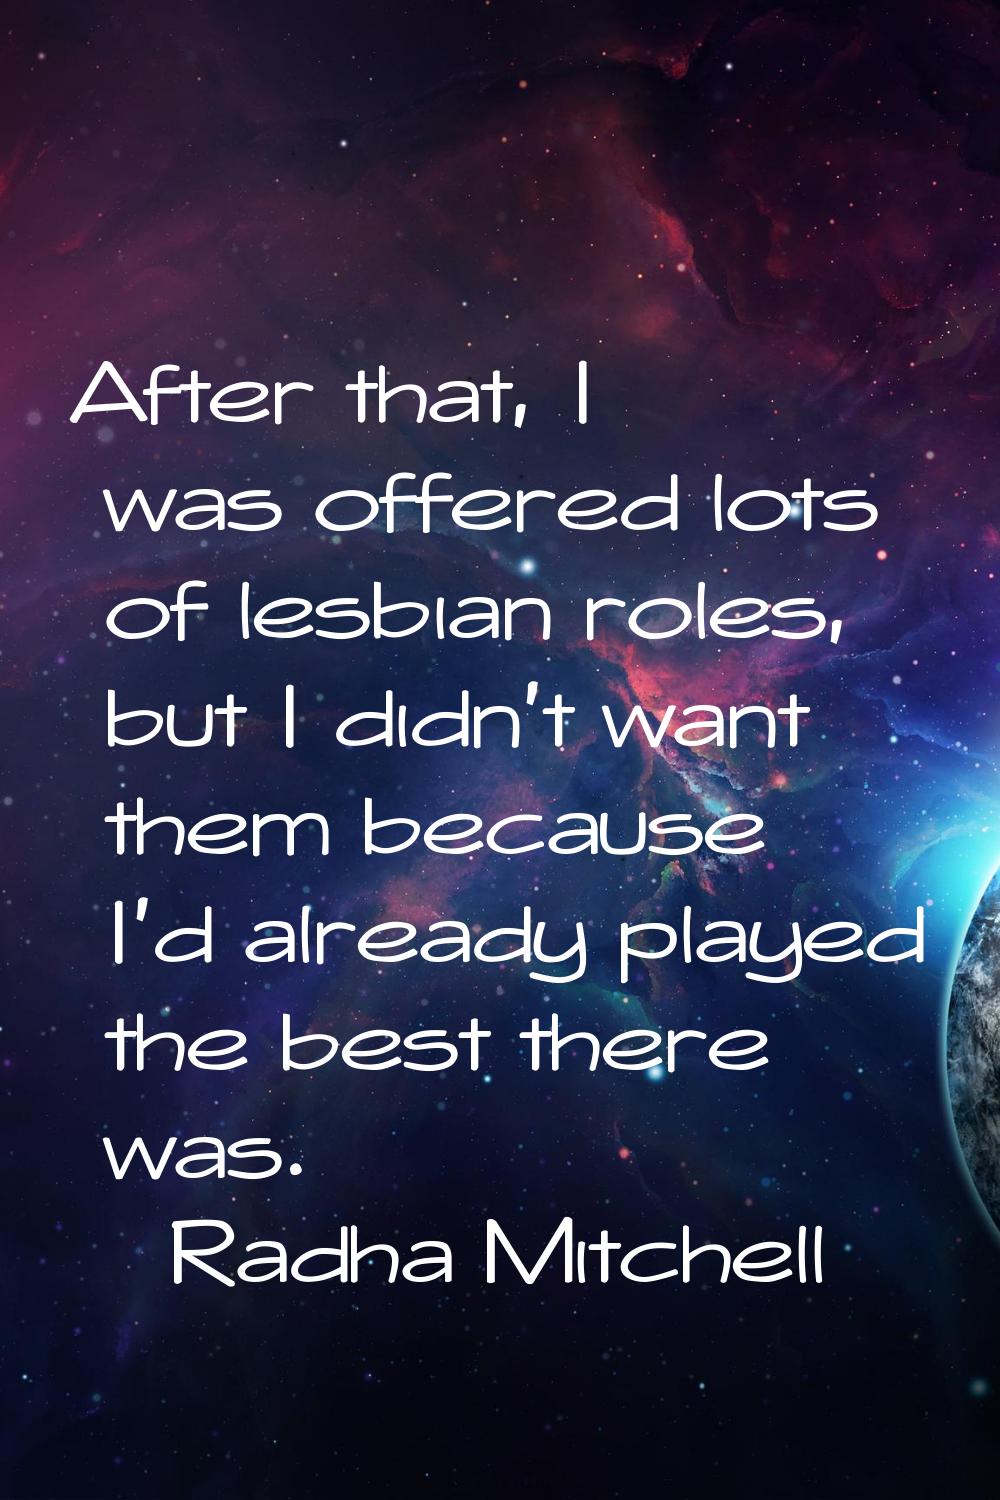 After that, I was offered lots of lesbian roles, but I didn't want them because I'd already played 